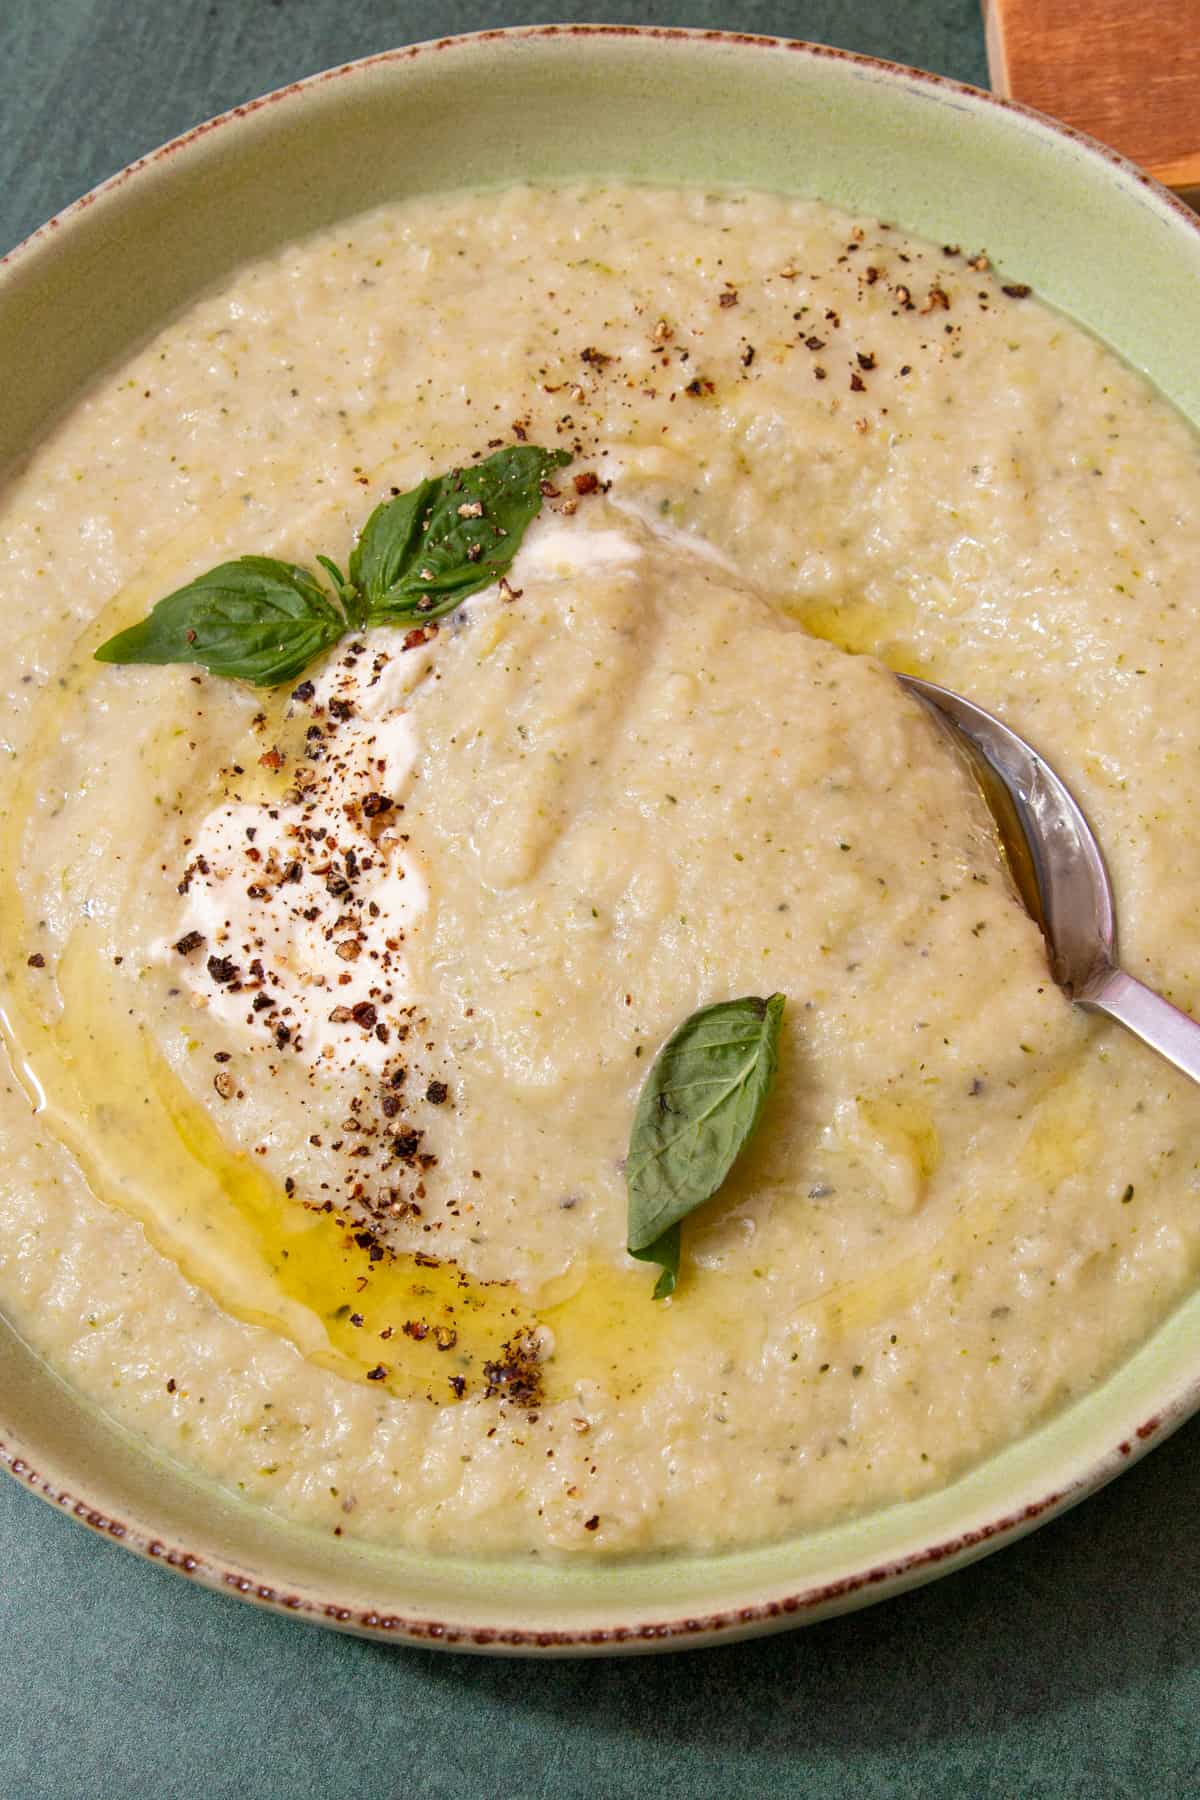 A bowl with a thick, creamy soup and a swirl of oil and cream topped with fresh basil and chilli flakes with a spoon.